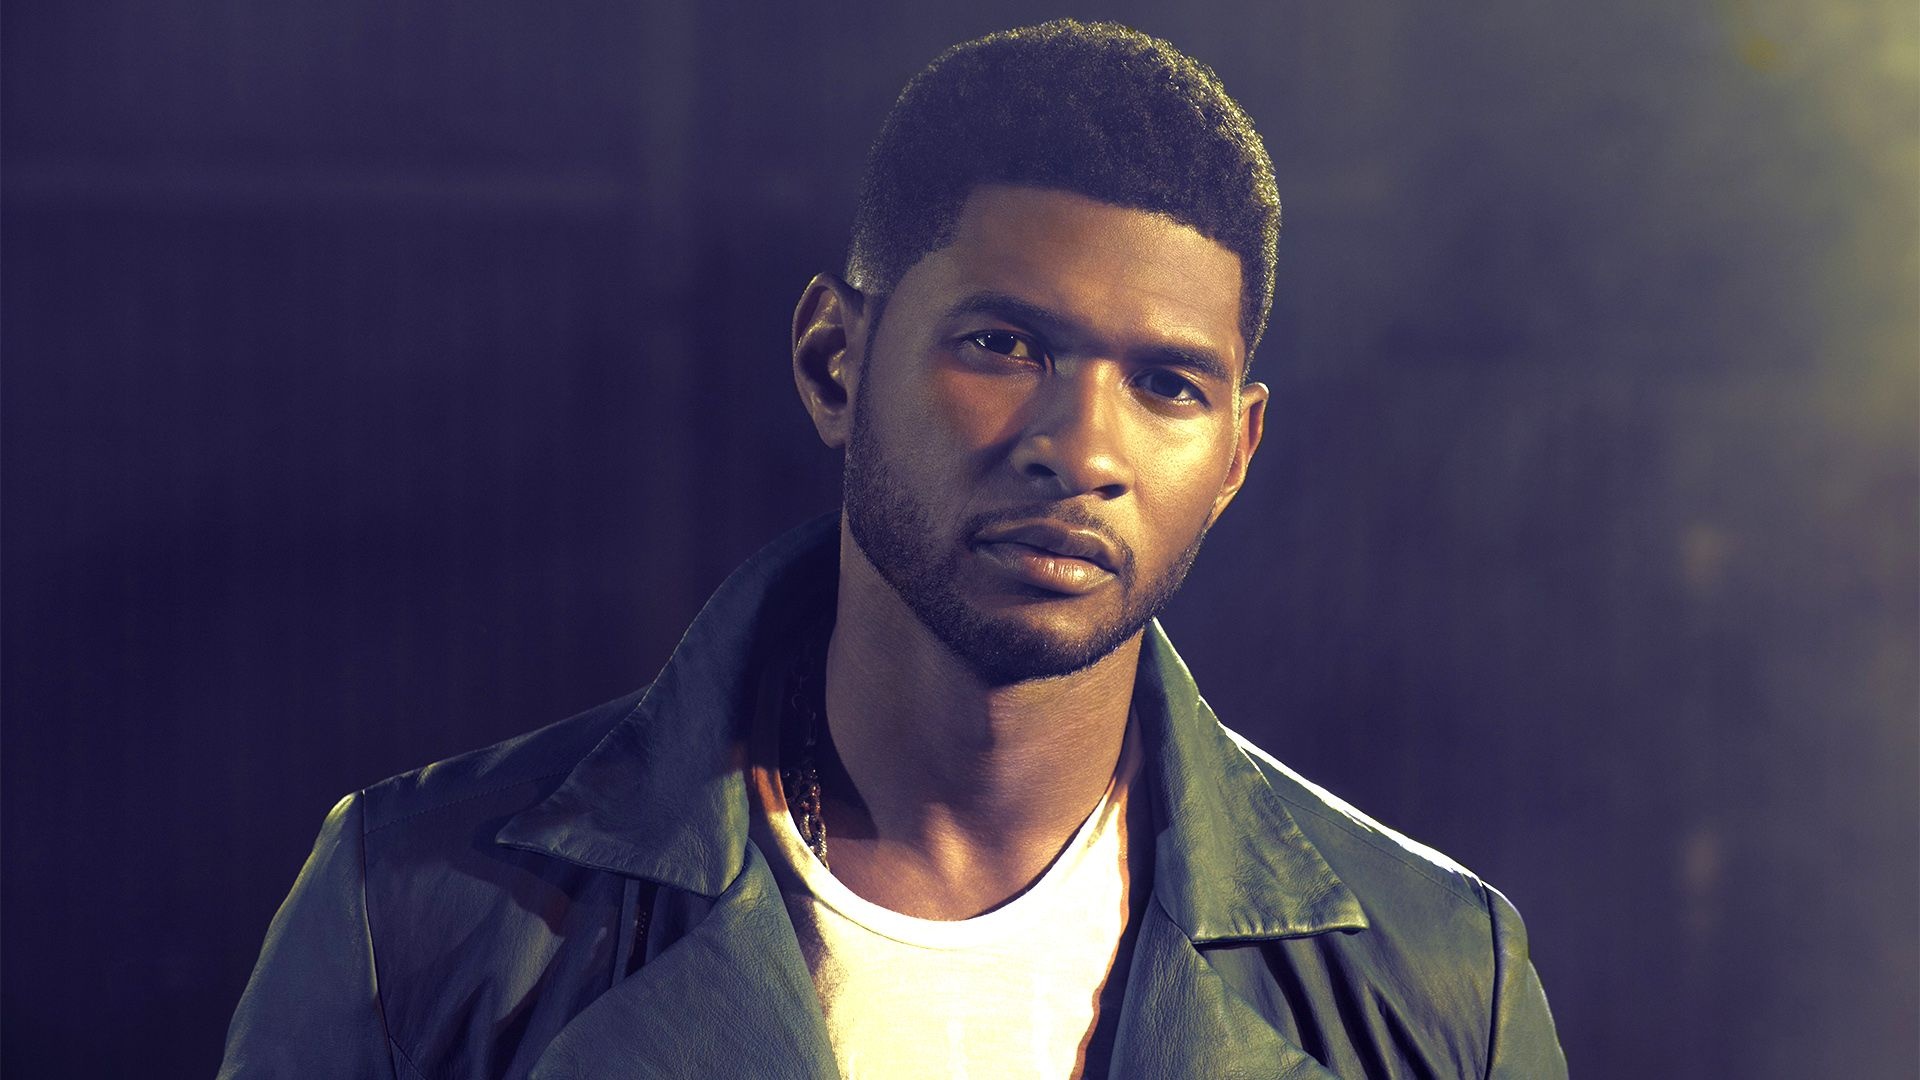 Usher Wallpapers - Top Free Usher Backgrounds 1920x1080